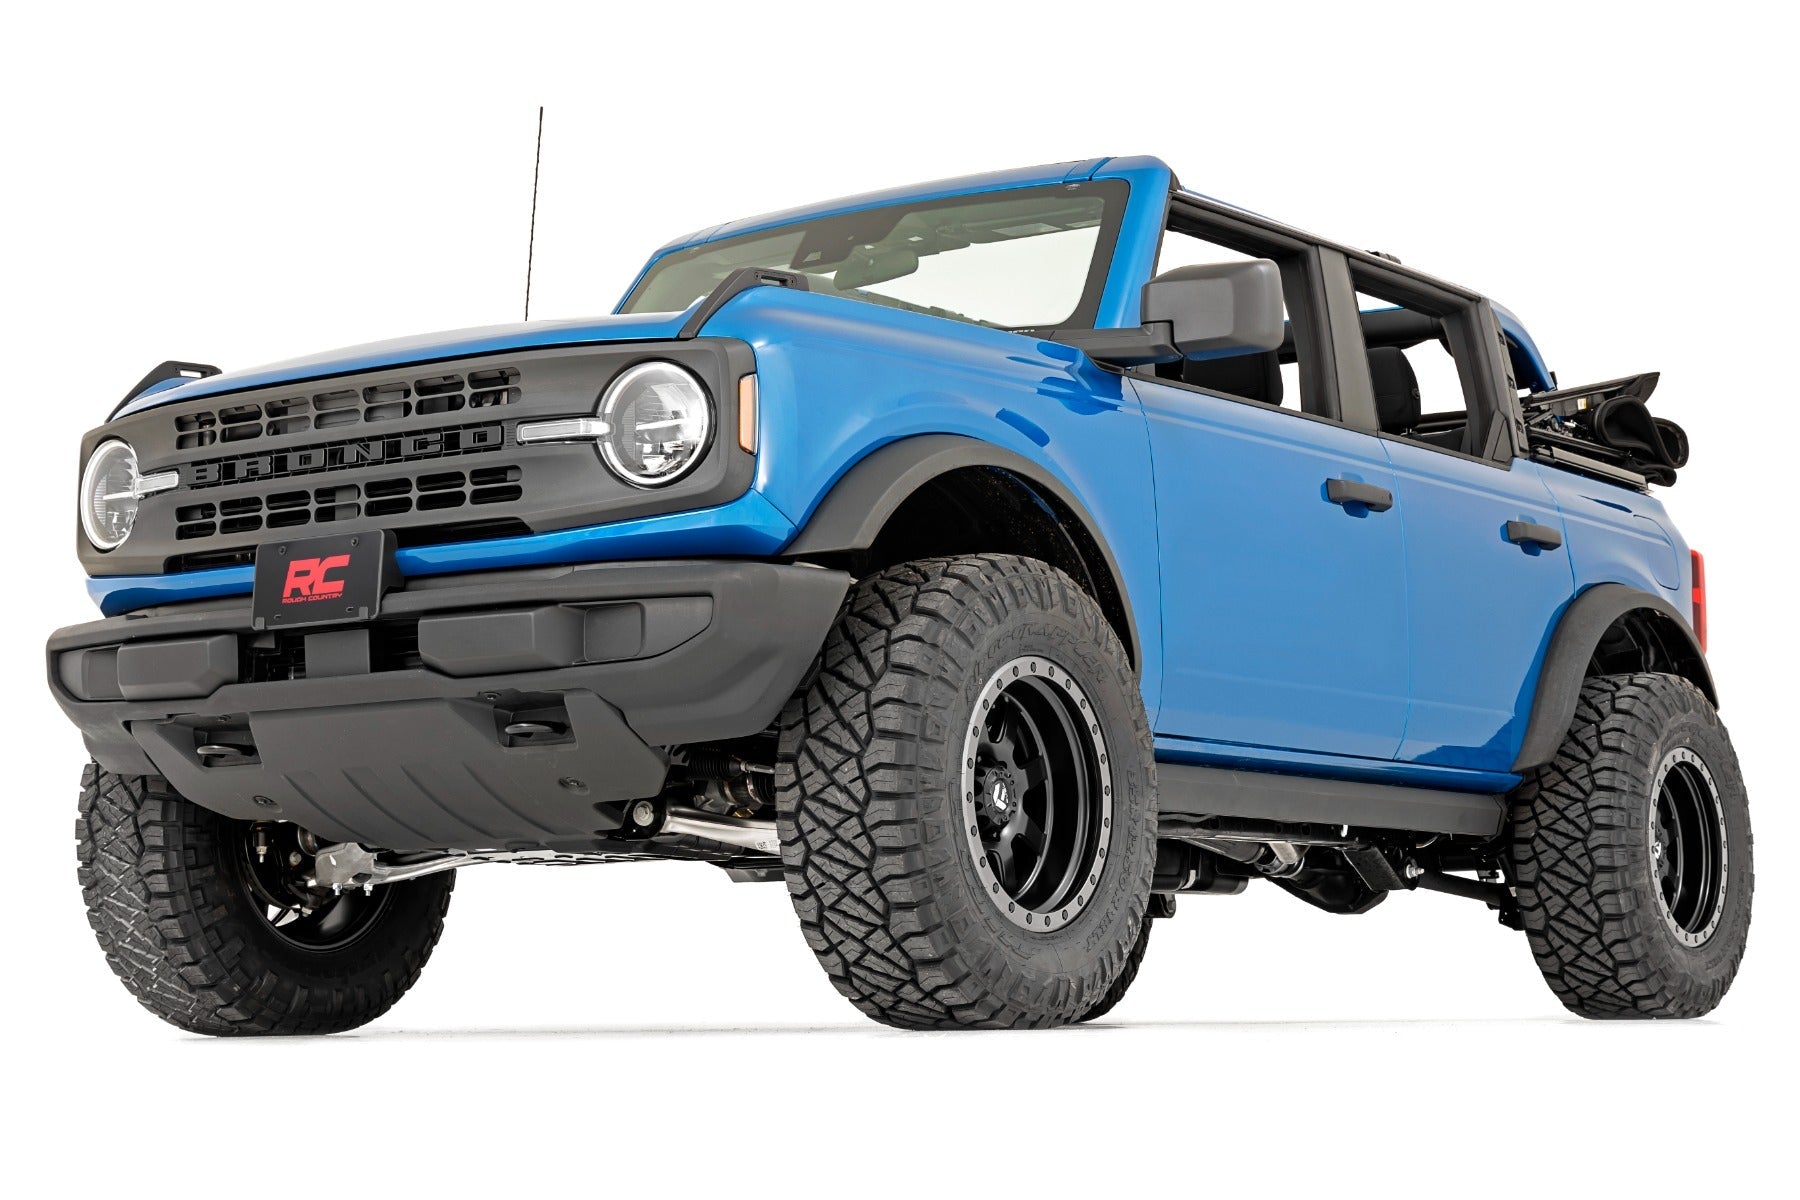 Ford Bronco 2.0 Inch Lift Kit  | Rough Country 40400